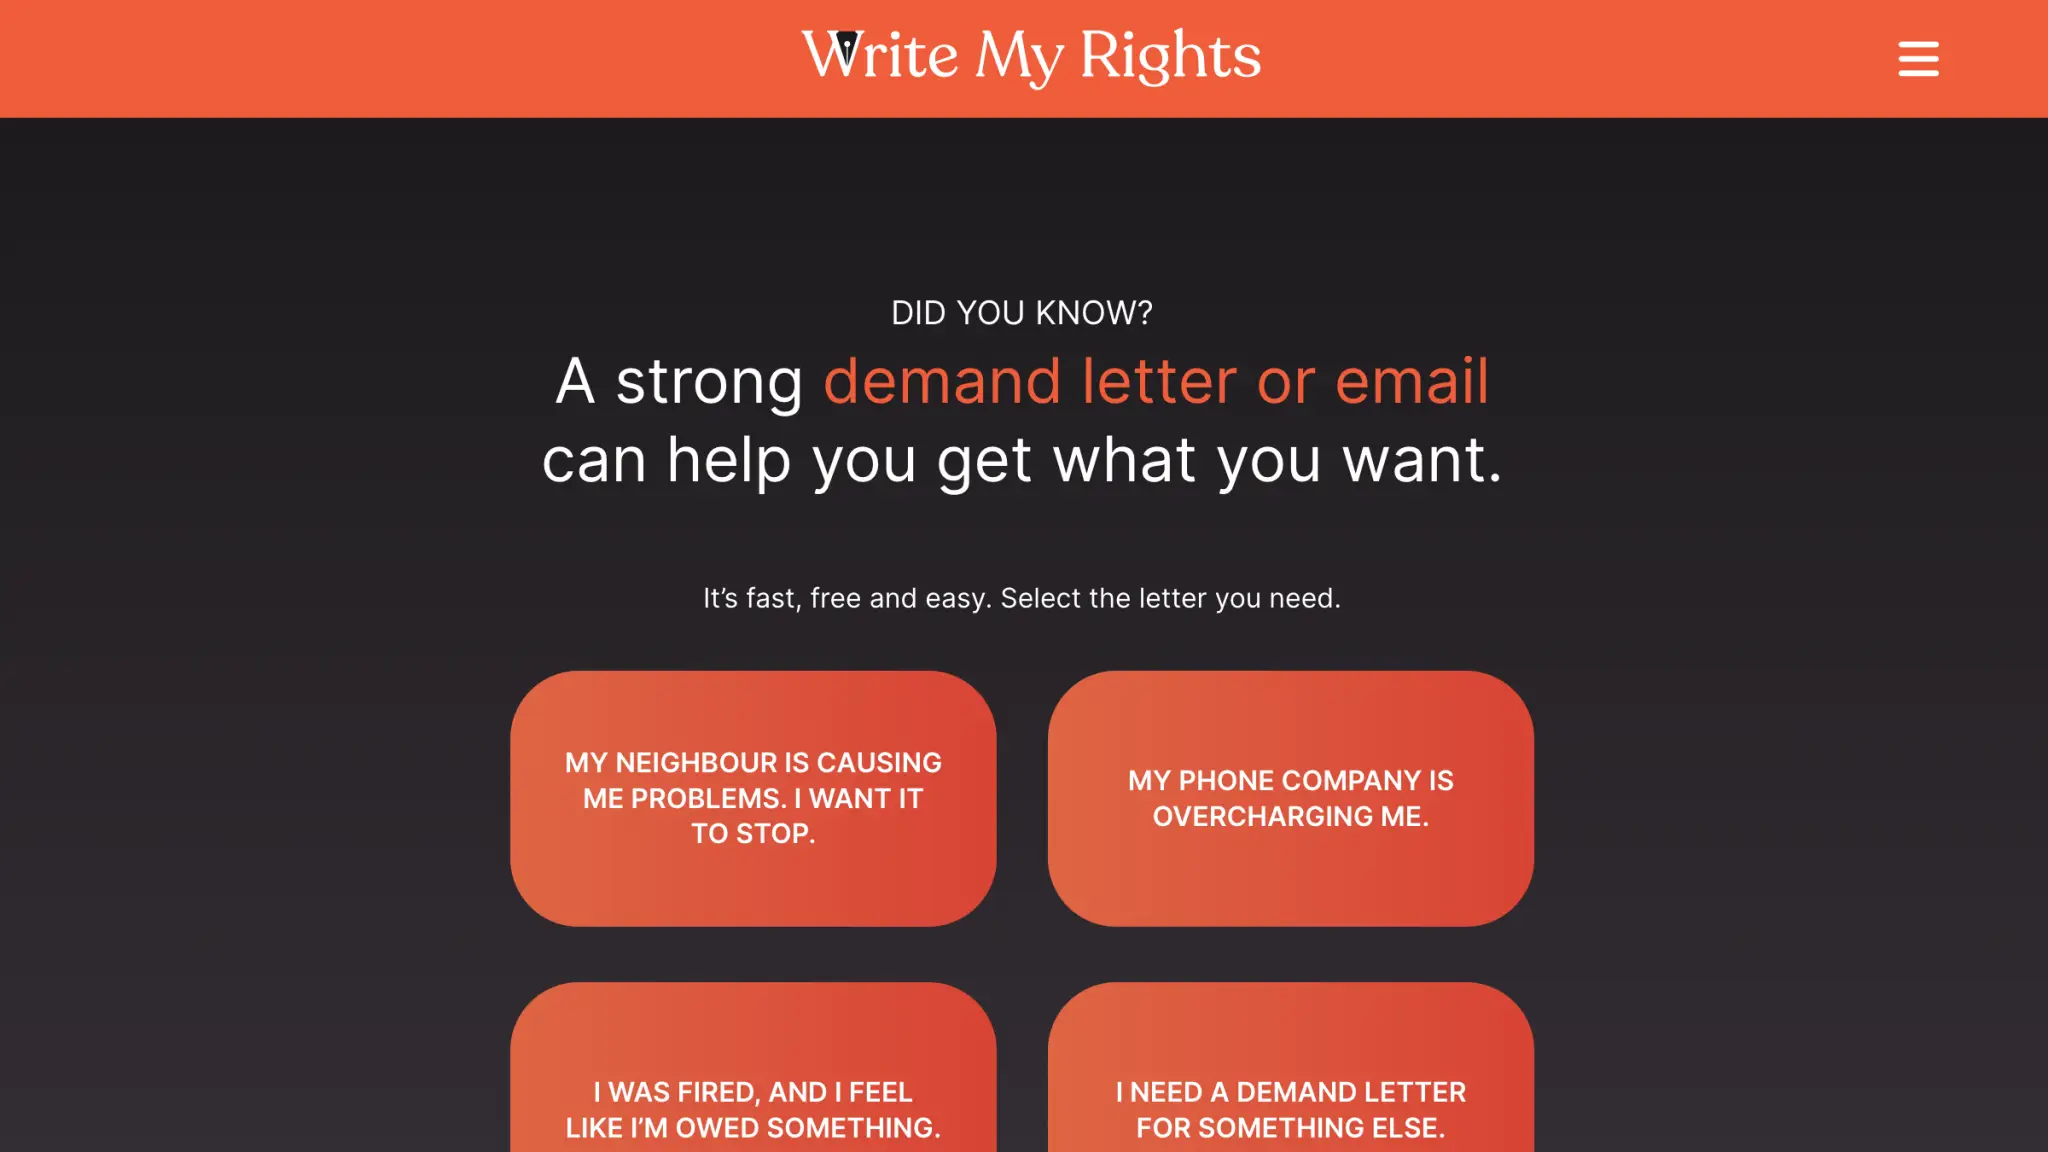 Write my rights home page